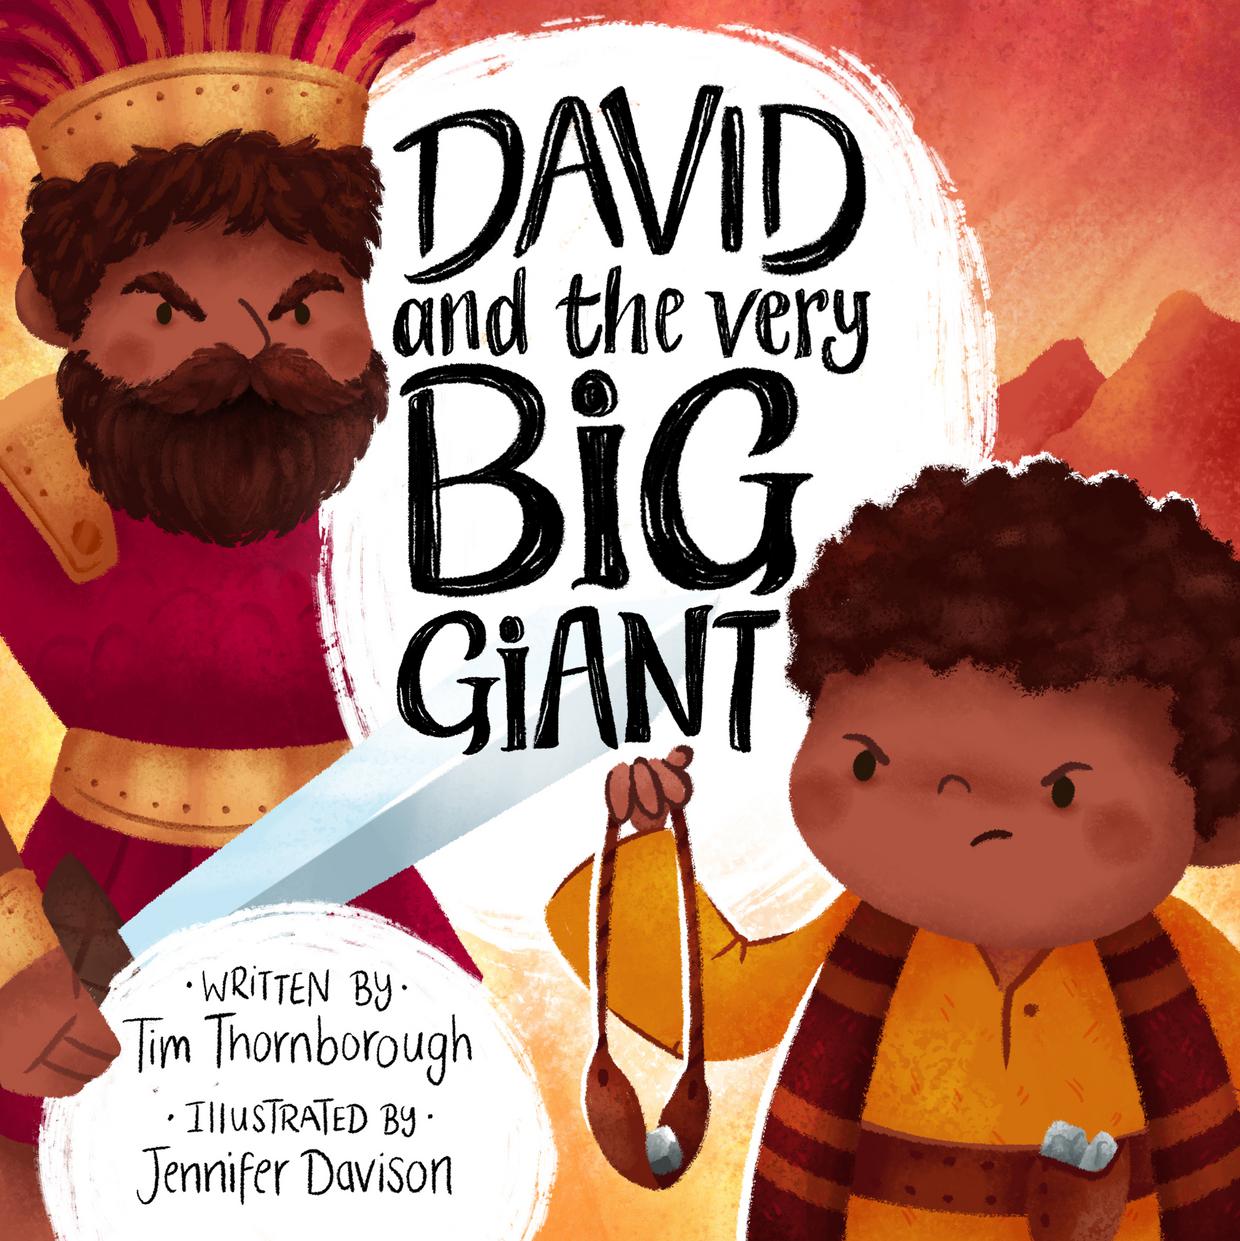 Image of David and the Very Big Giant other